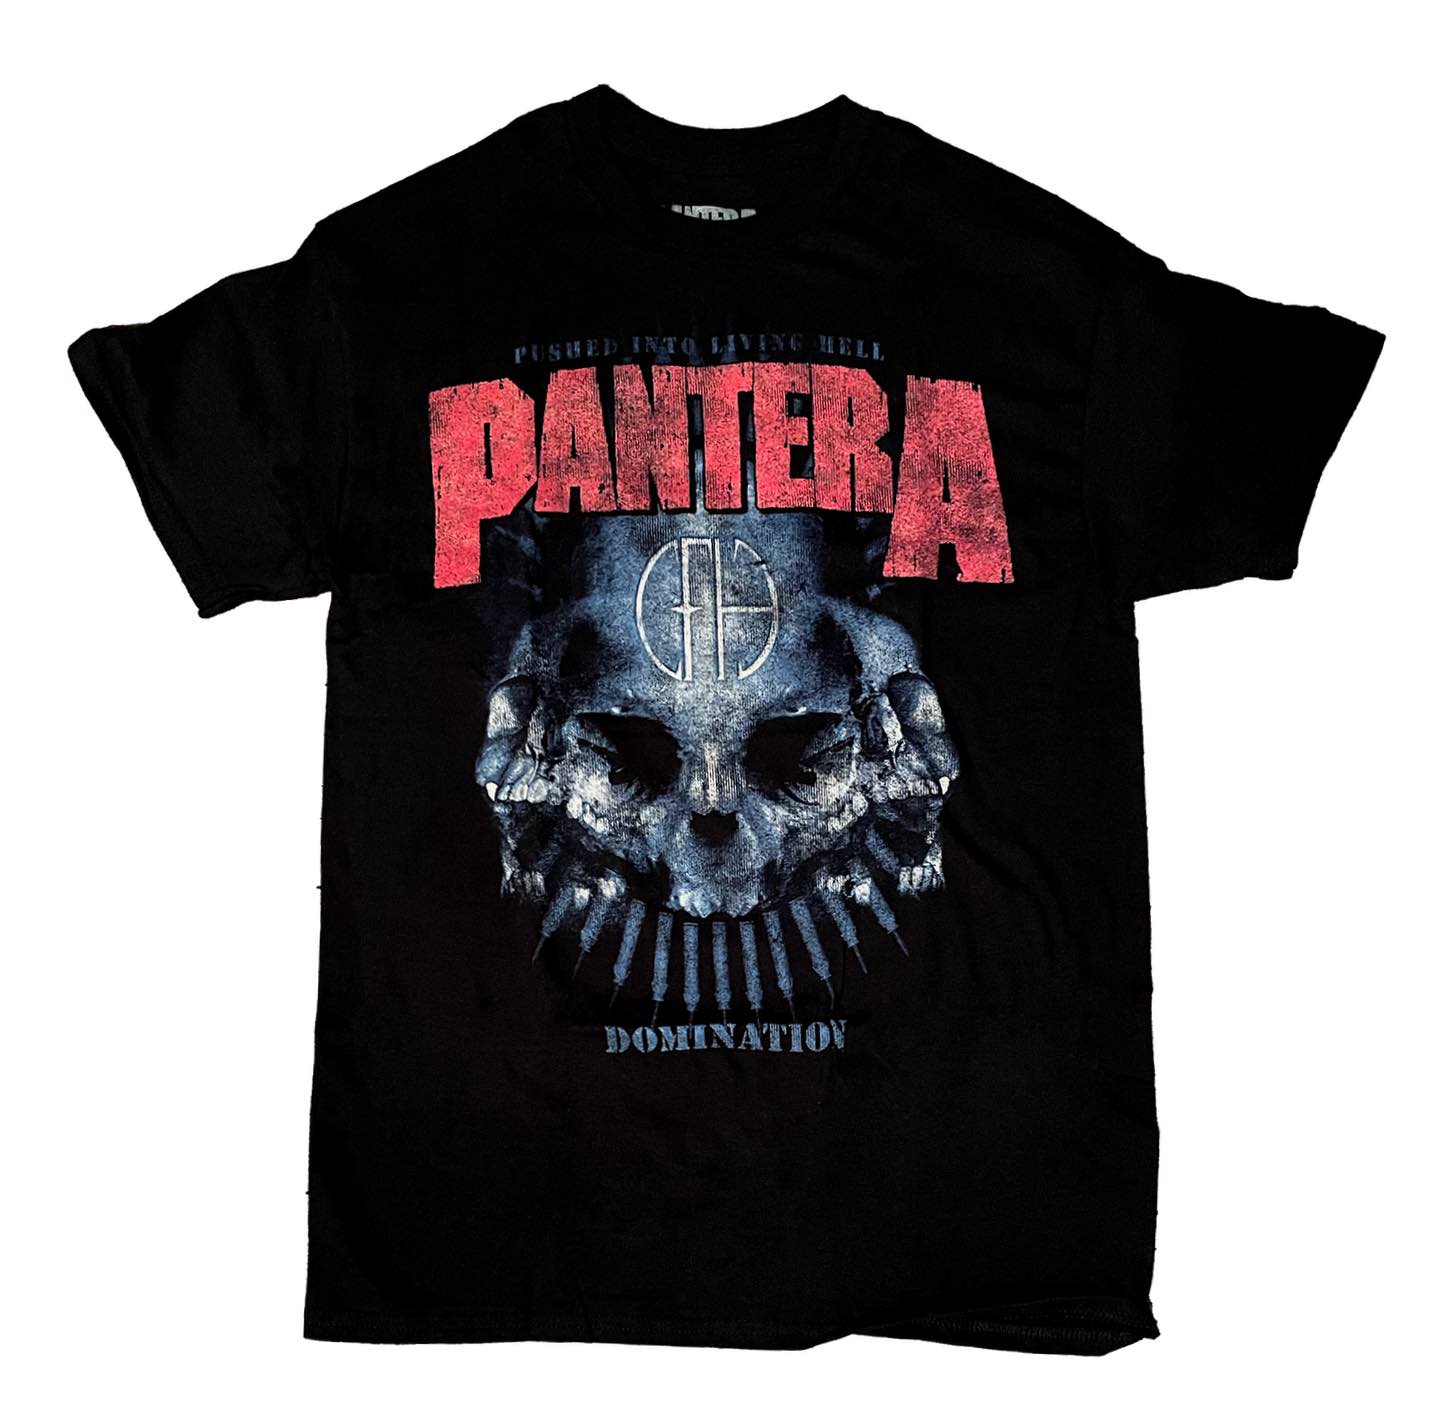 DARKSTAR SHOP | Officially Licensed Band Tees and Apparel